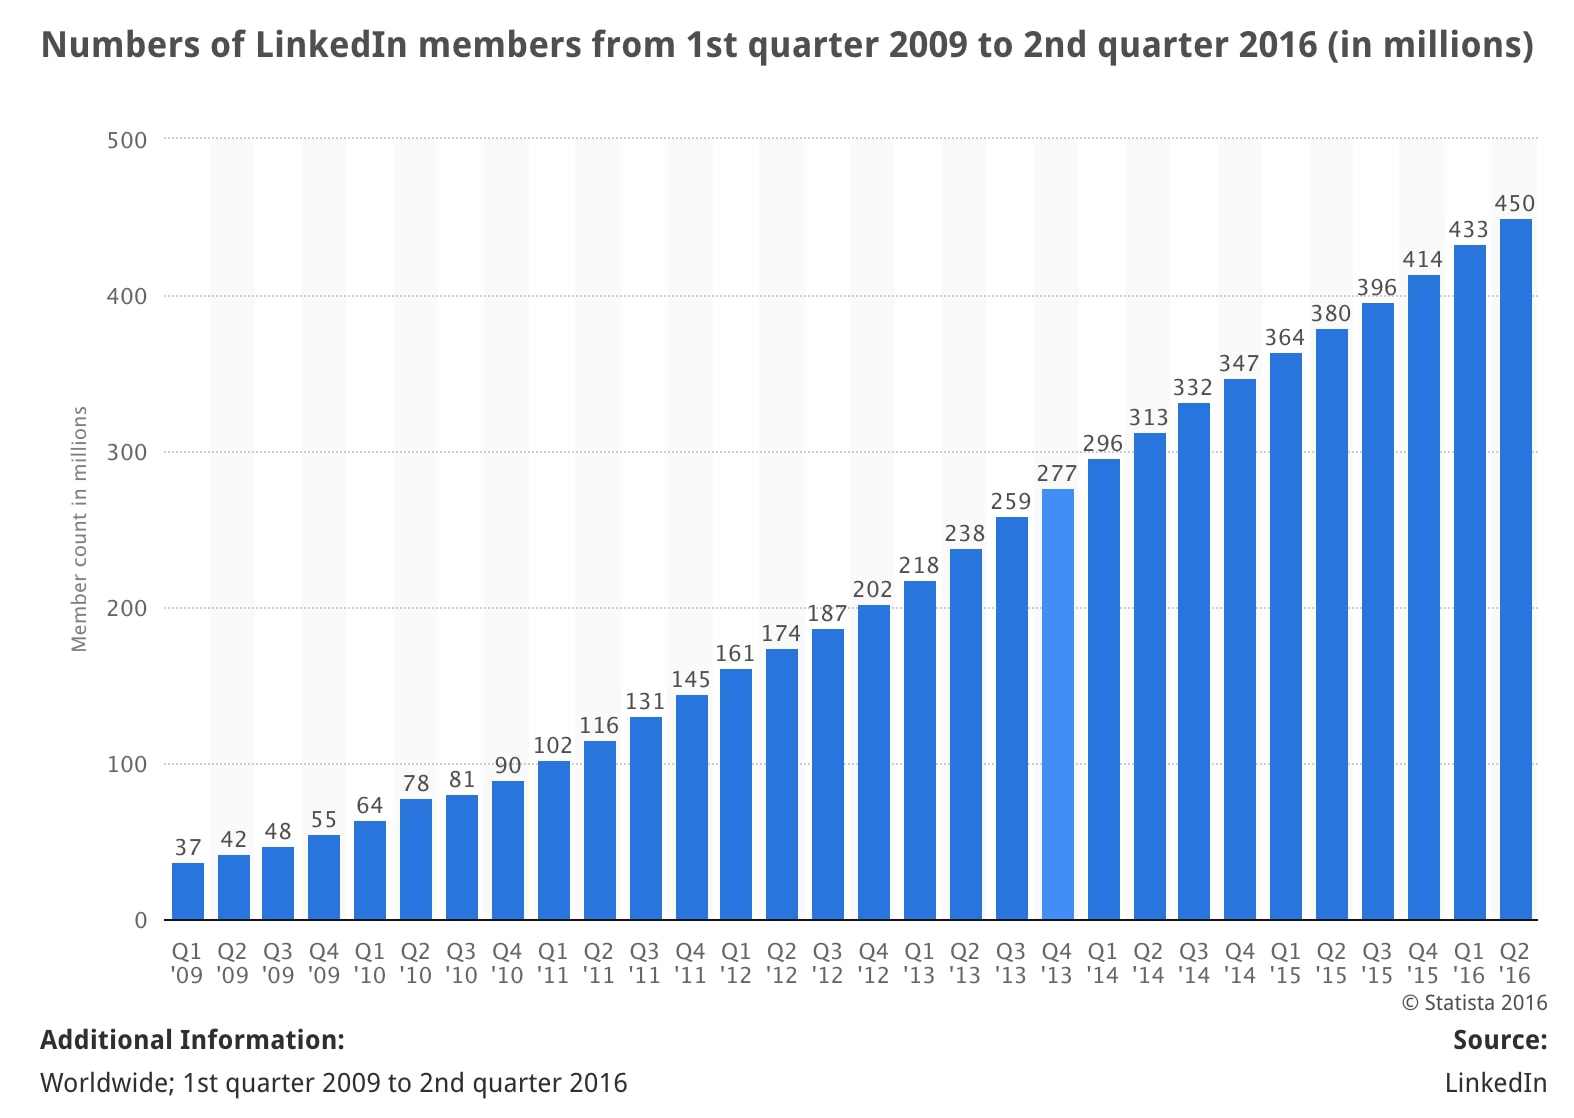 From 2009 to 2016, LinkedIn has experienced tremendous user growth.